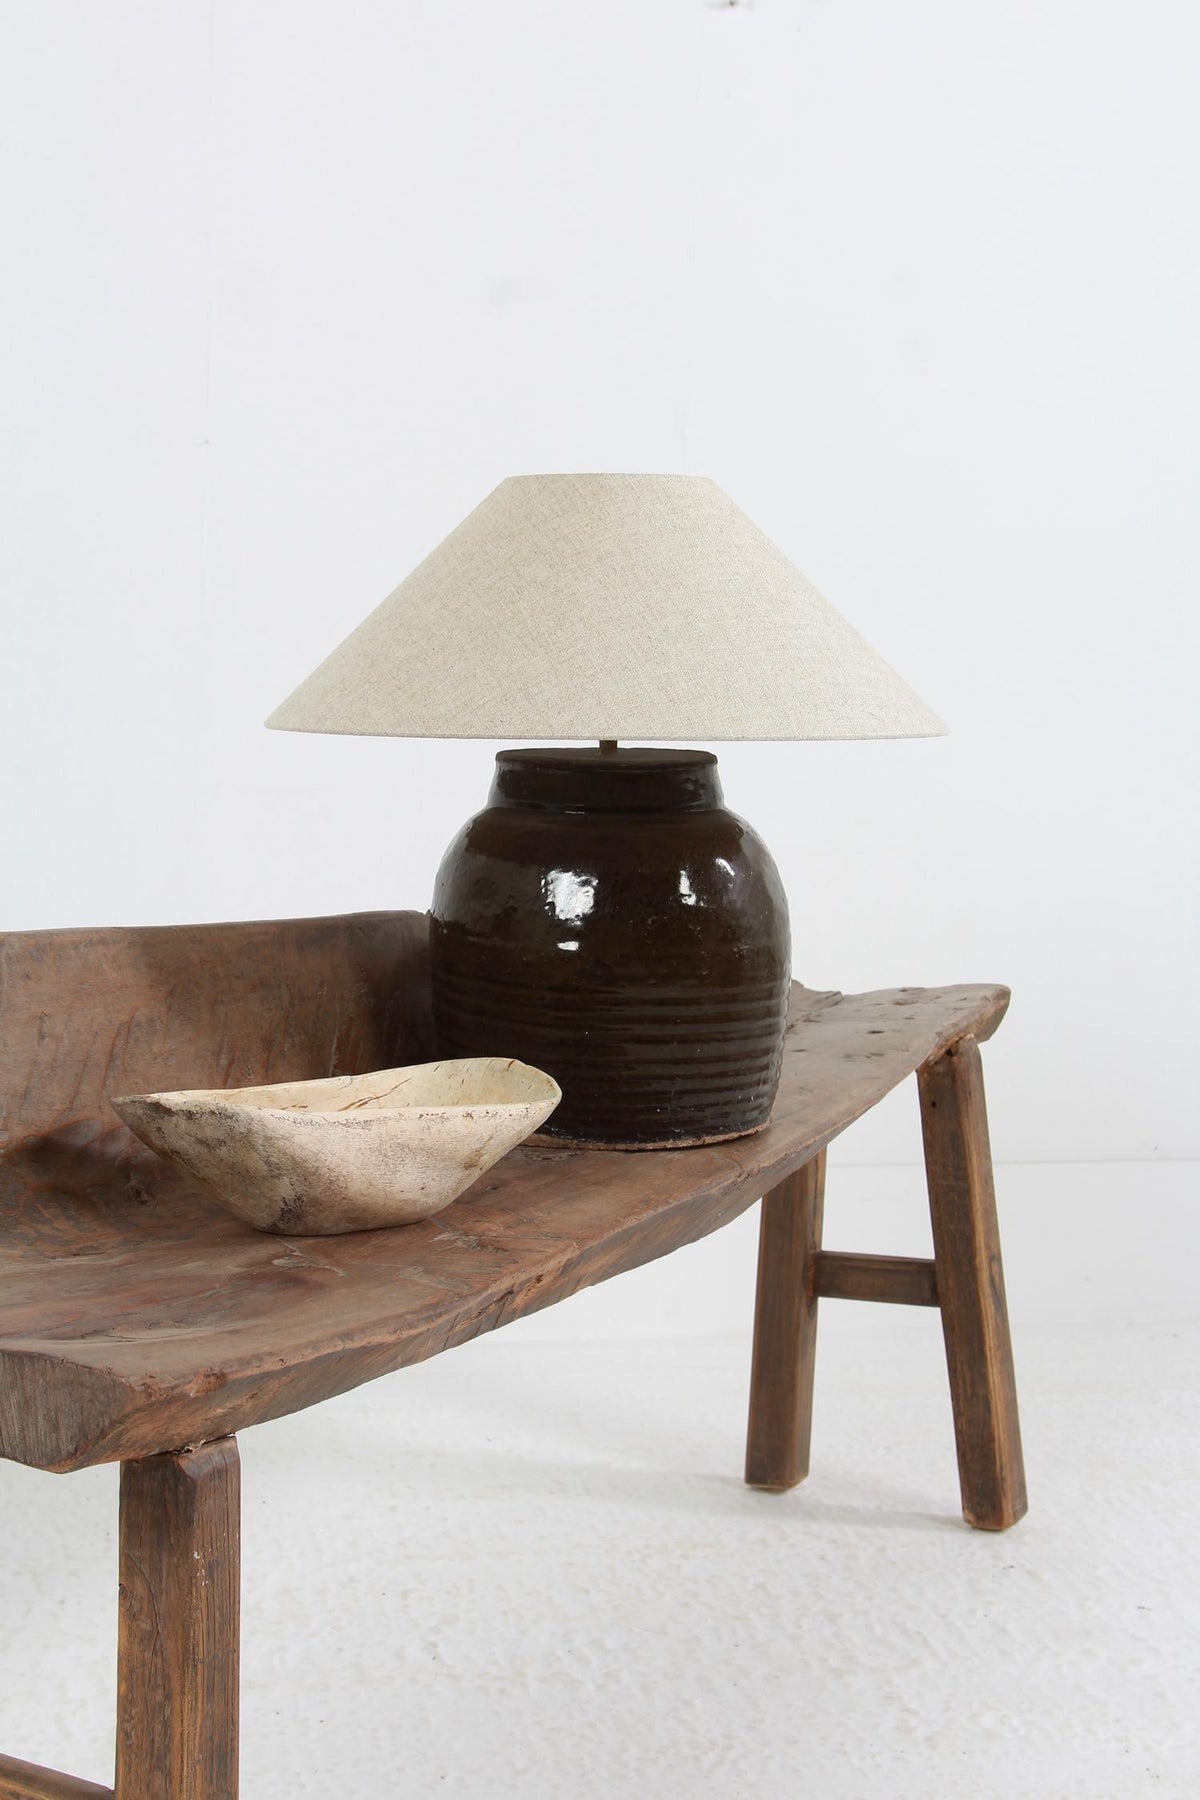 ANTIQUE CHINESE WATER POT LAMP WITH NATURAL BELGIUM LINEN SHADE